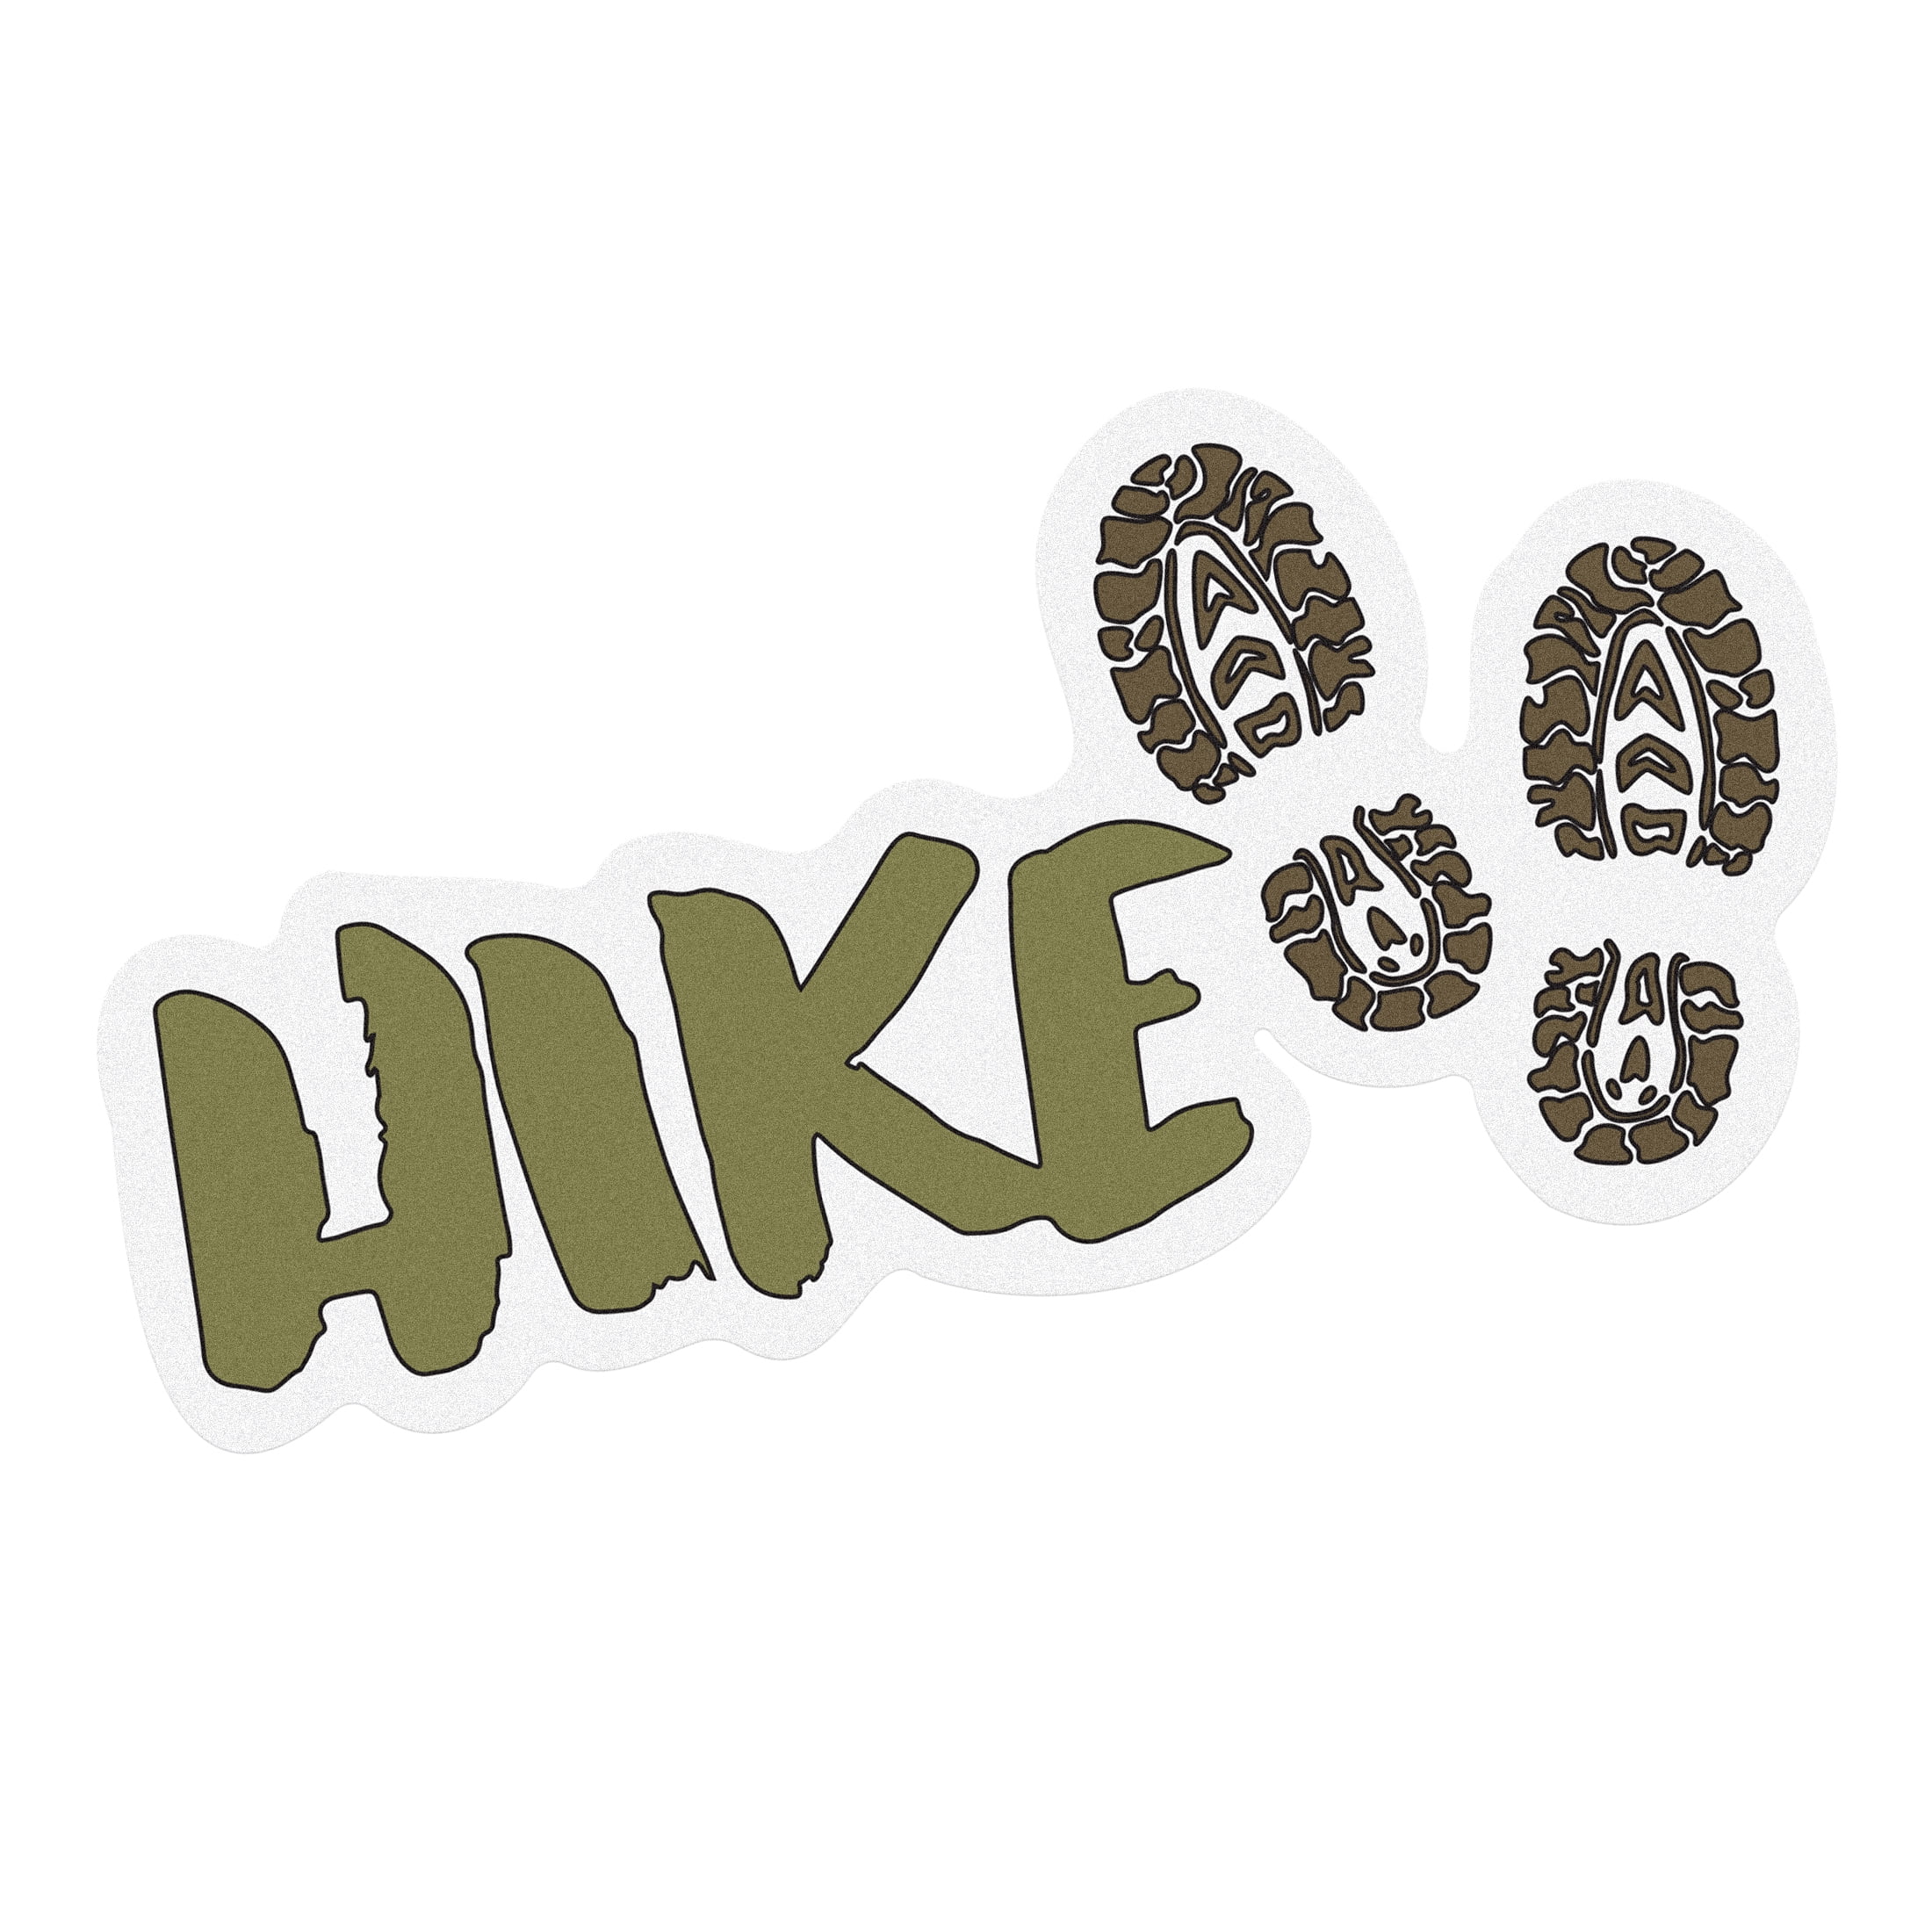 Auto Drive Hike with Bootprints Vinyl Automotive Decal, 1 Pc